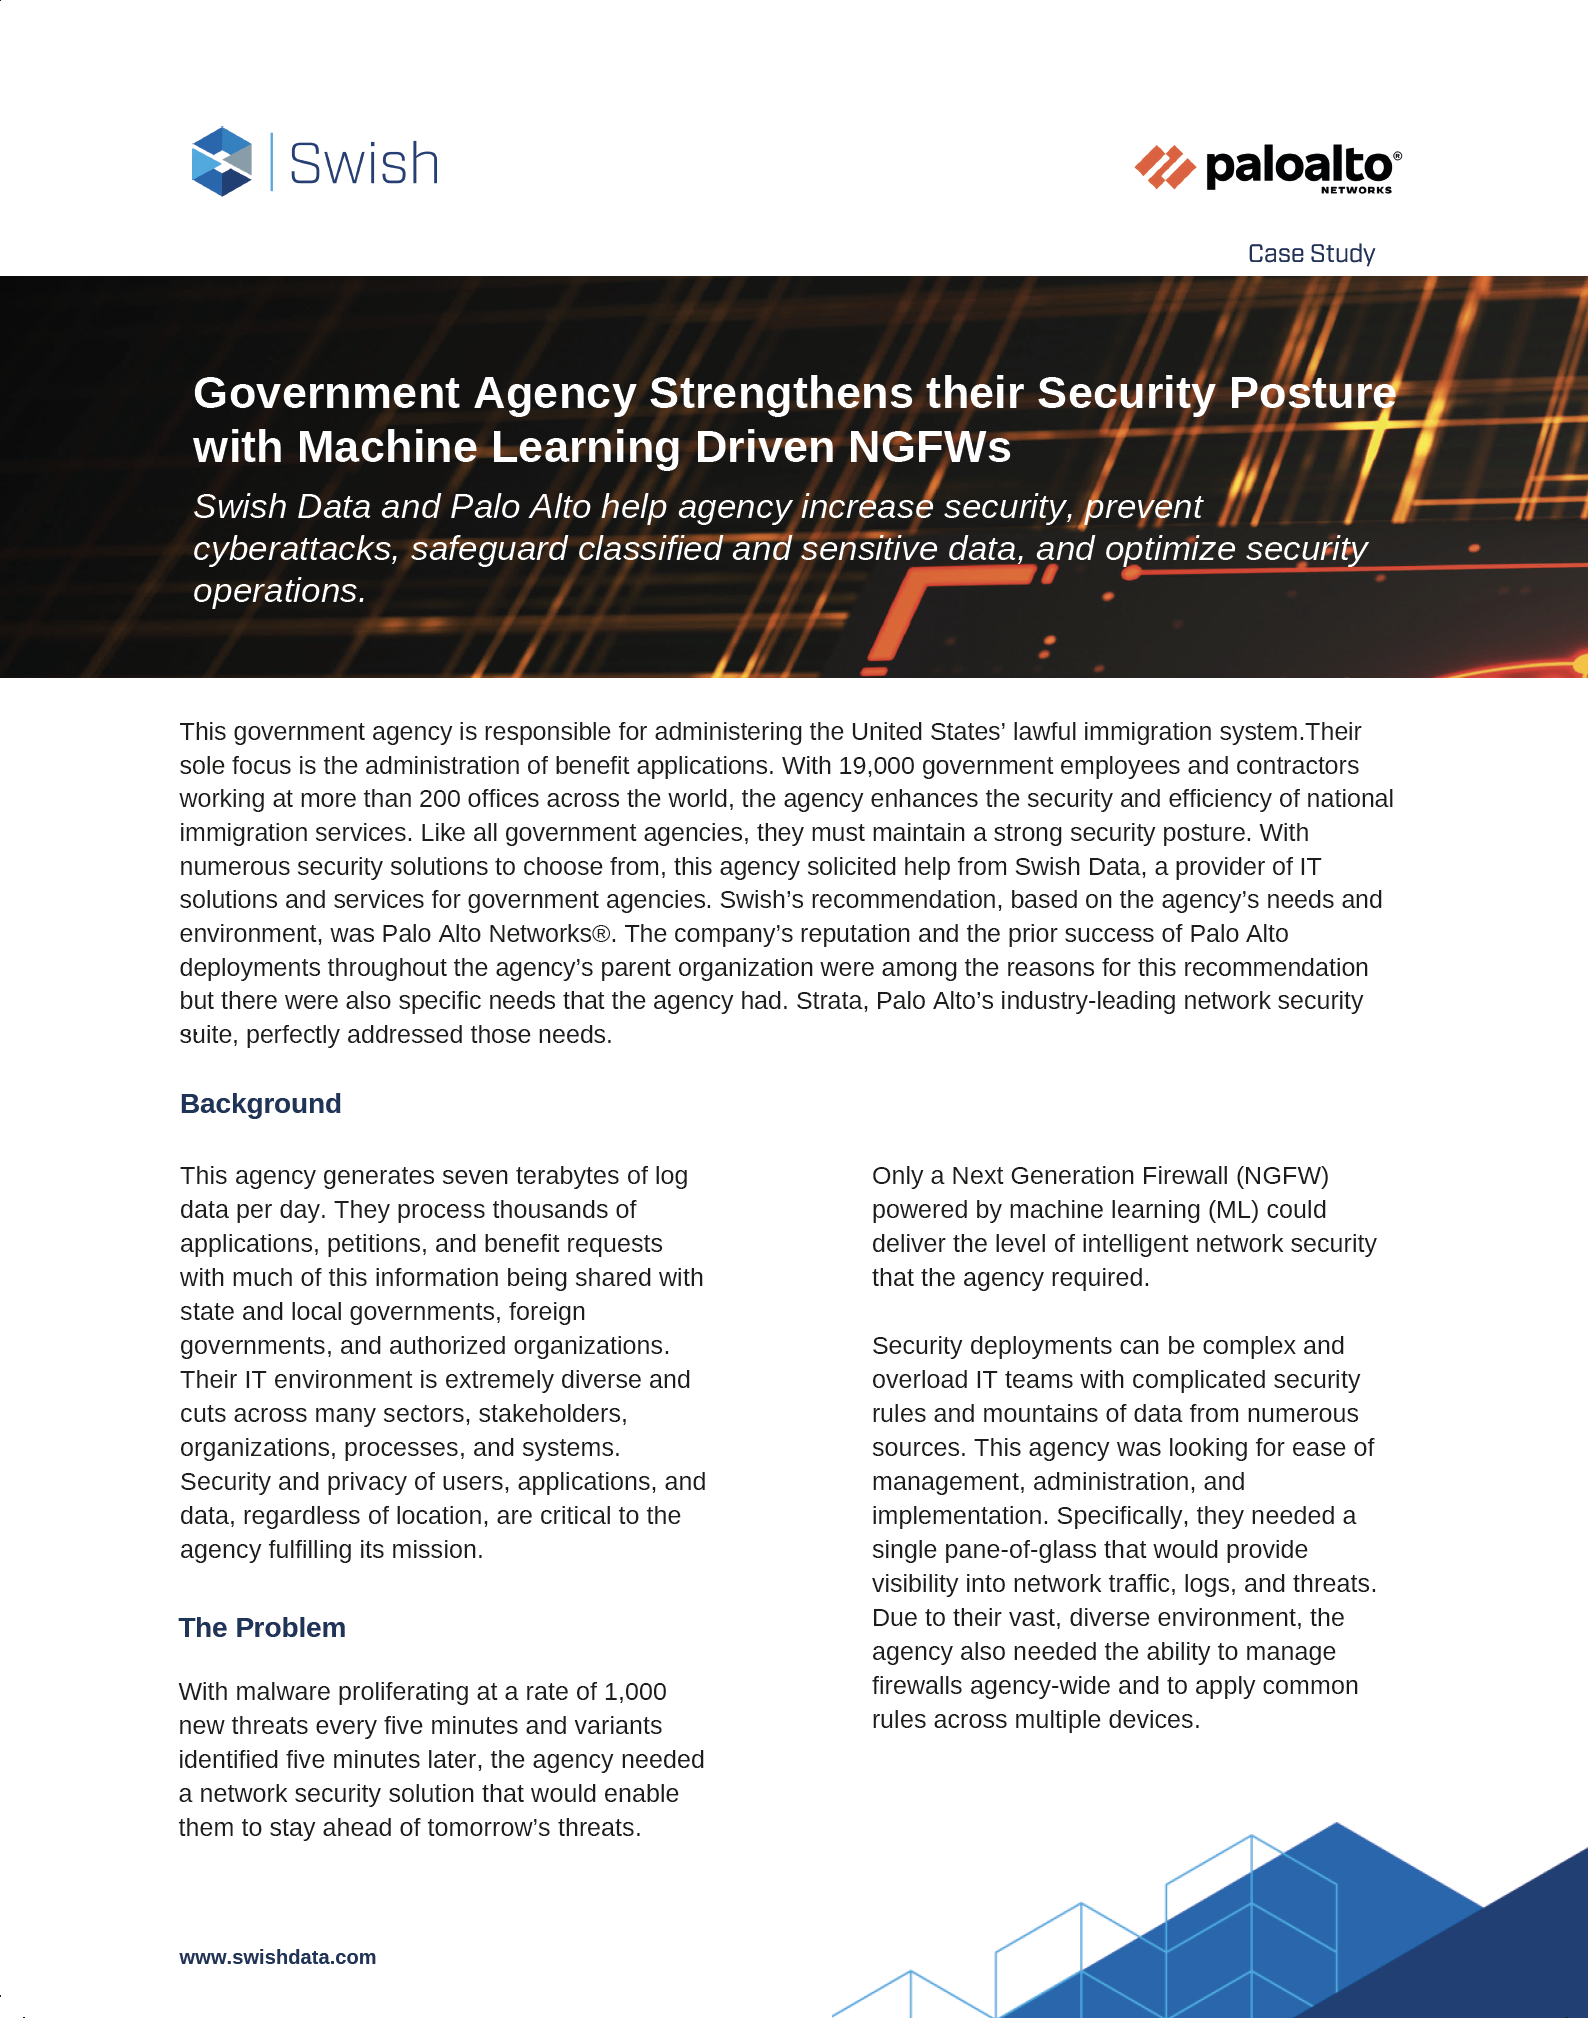 Government Agency case study cover page